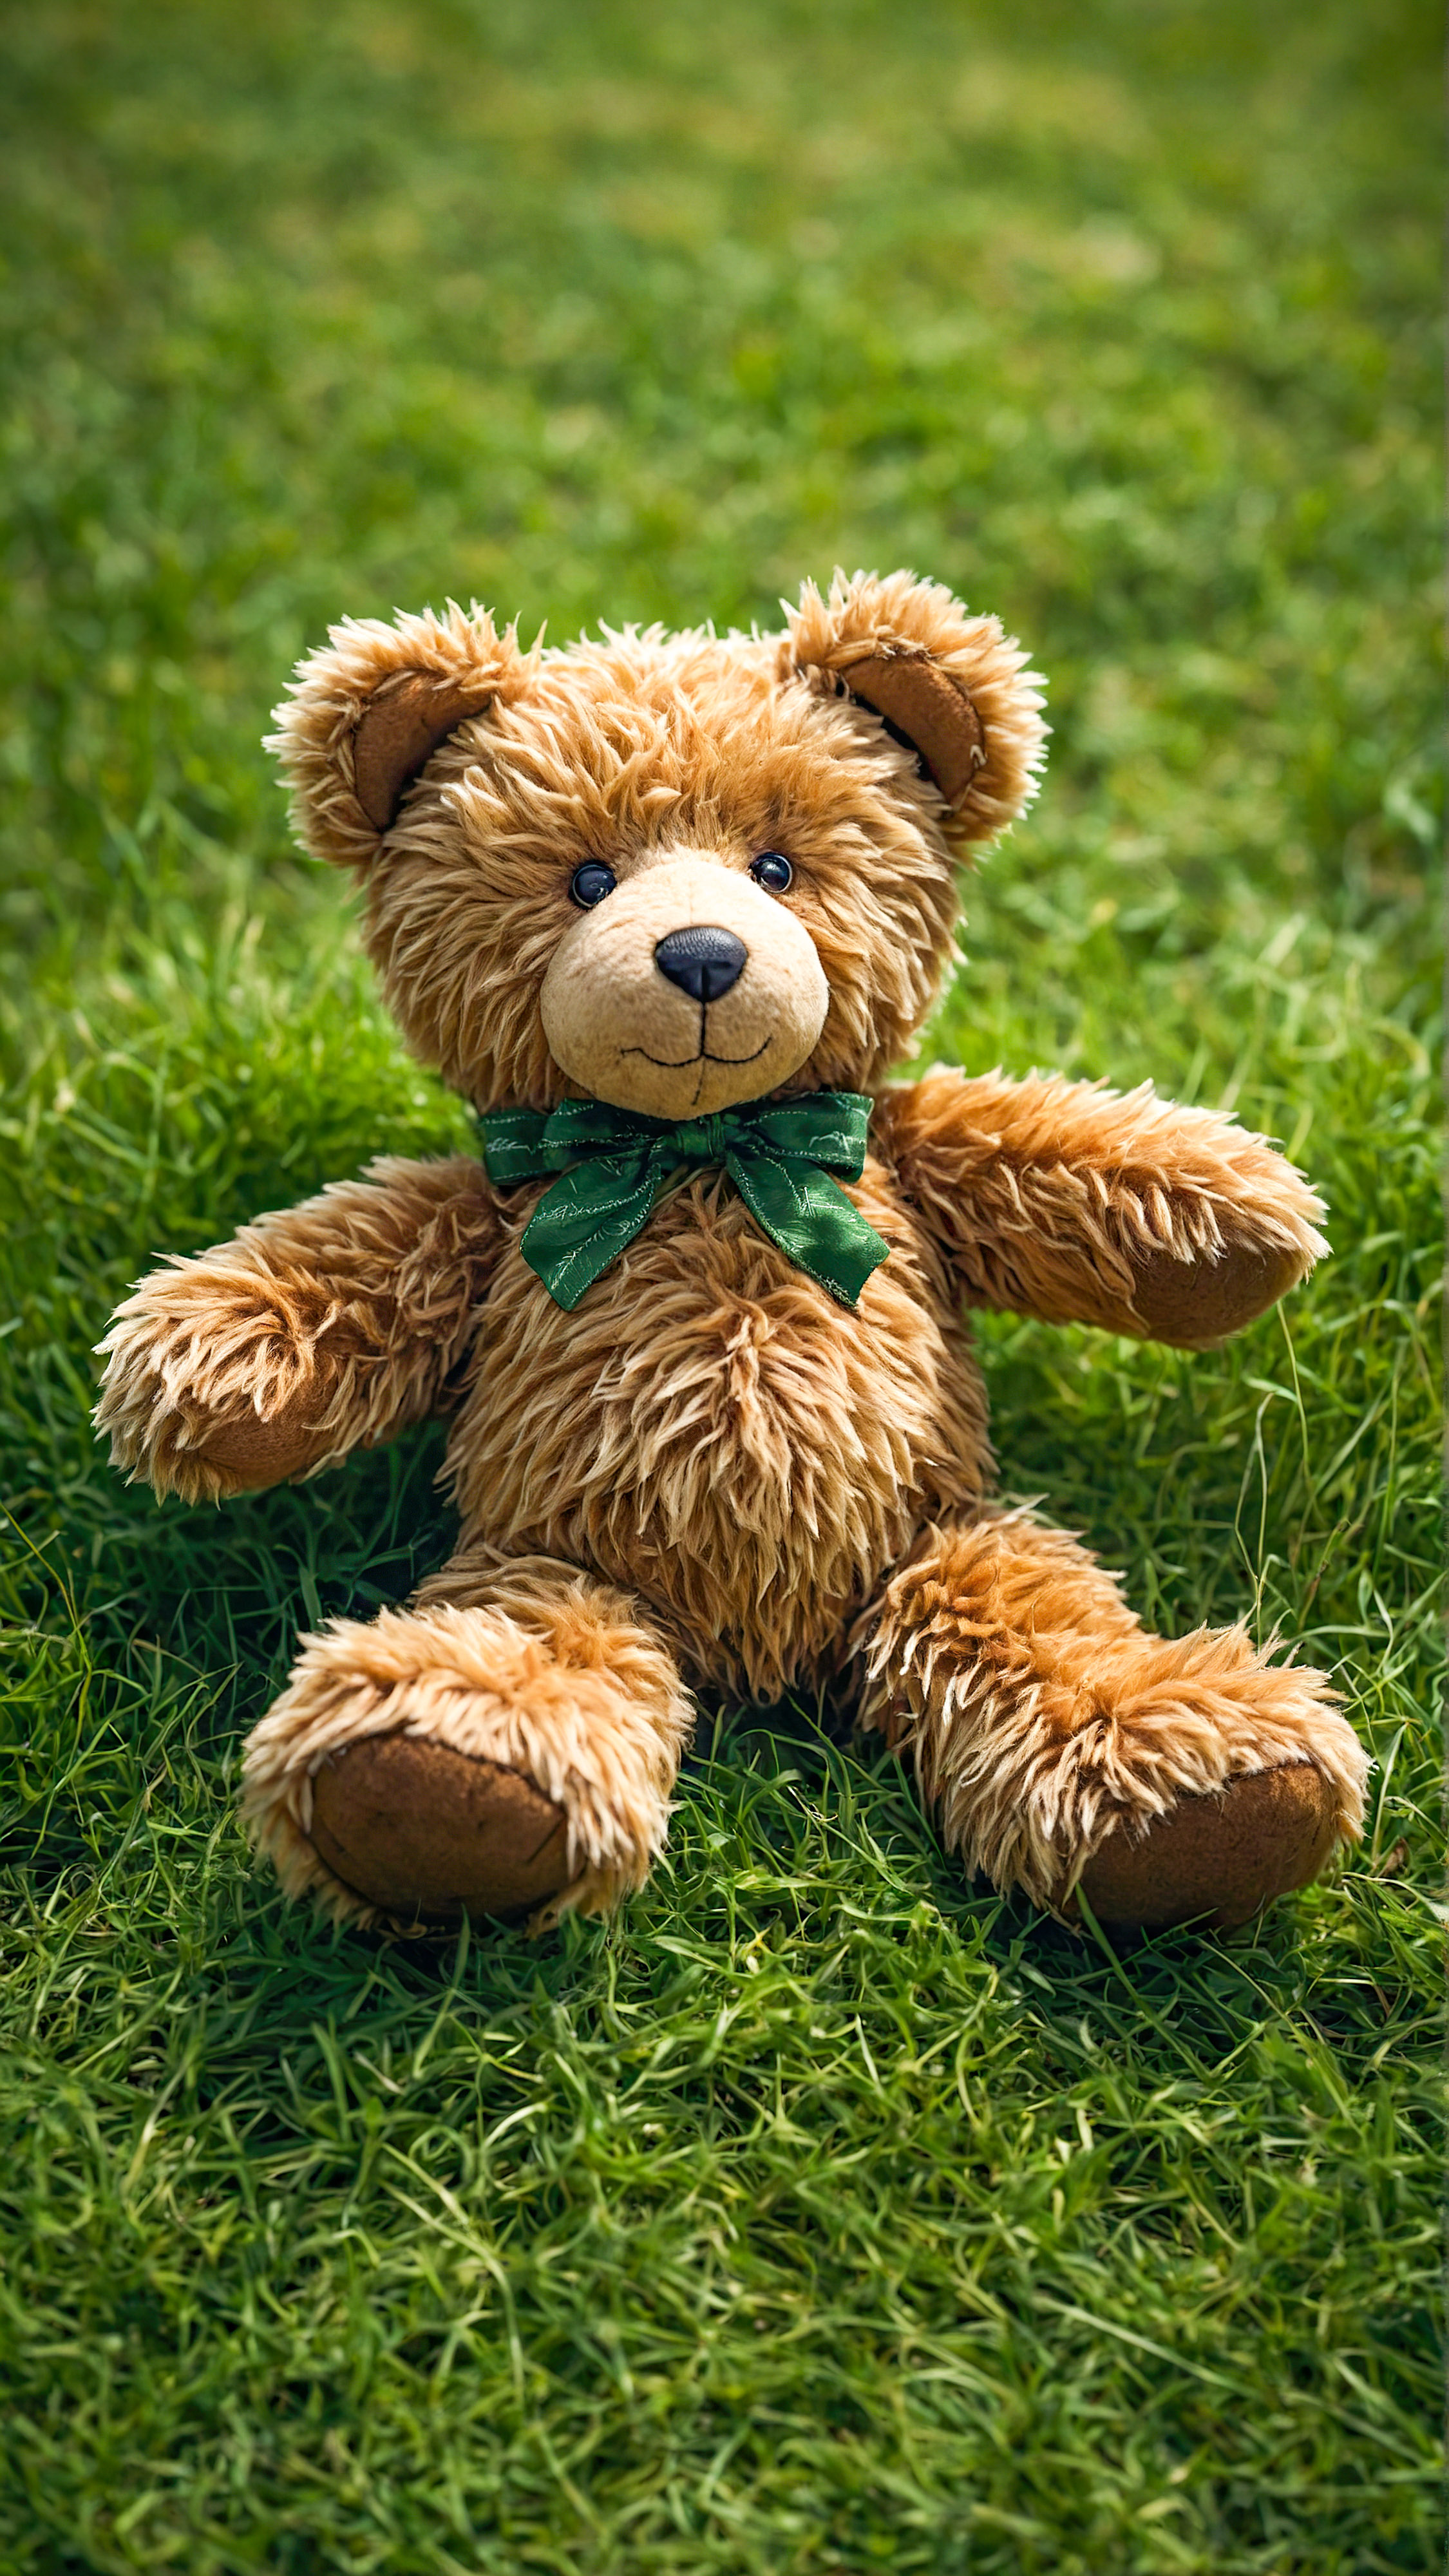 Get a sense of warmth and comfort with our cool 4K iPhone wallpaper, showcasing a plush teddy bear lying on a vibrant green grassy surface, with its arms close to its face.